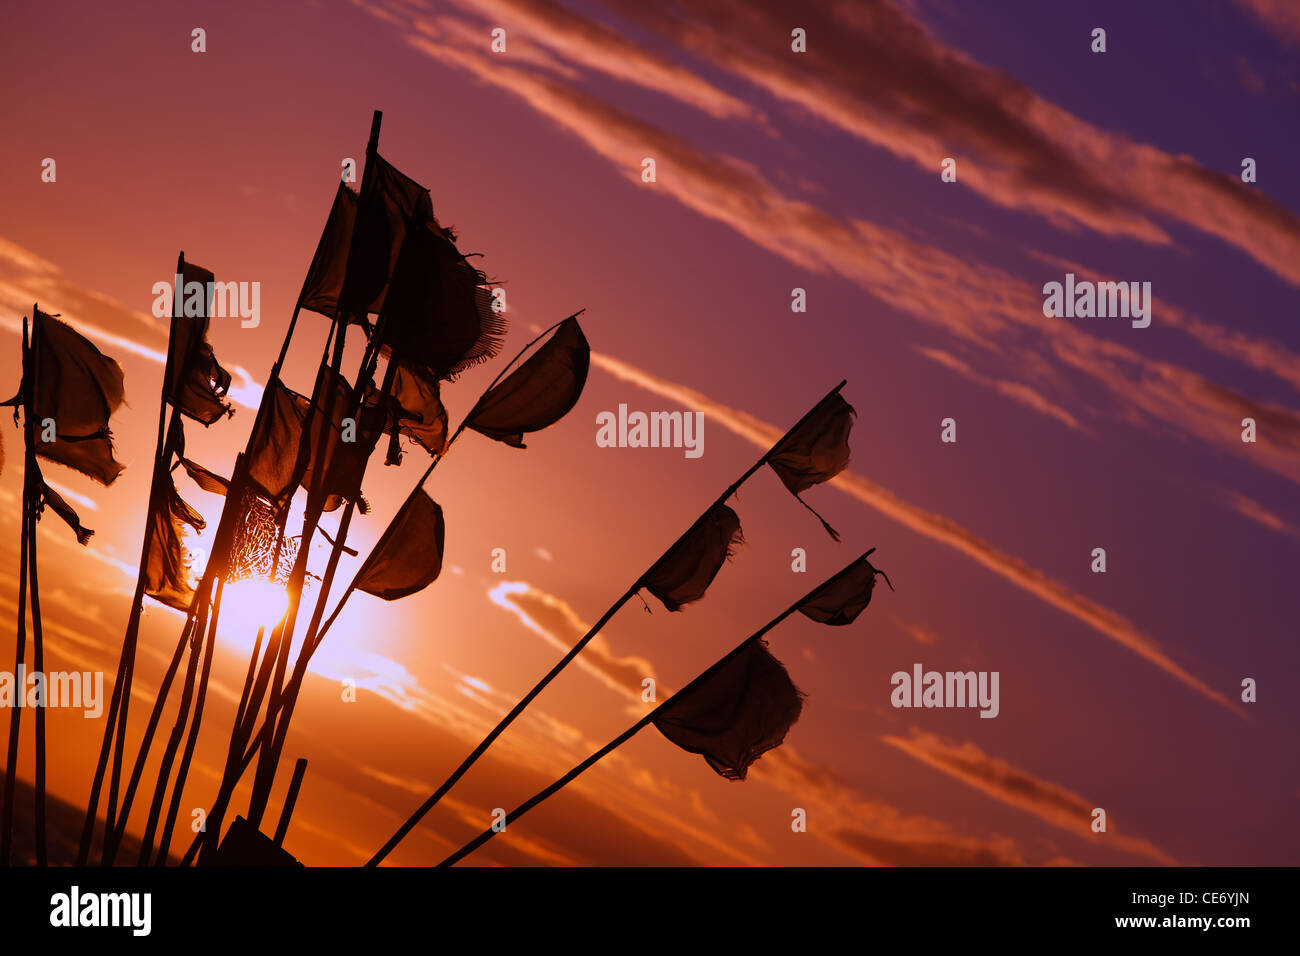 Fishermen flags against a sky at sunset. Stock Photo